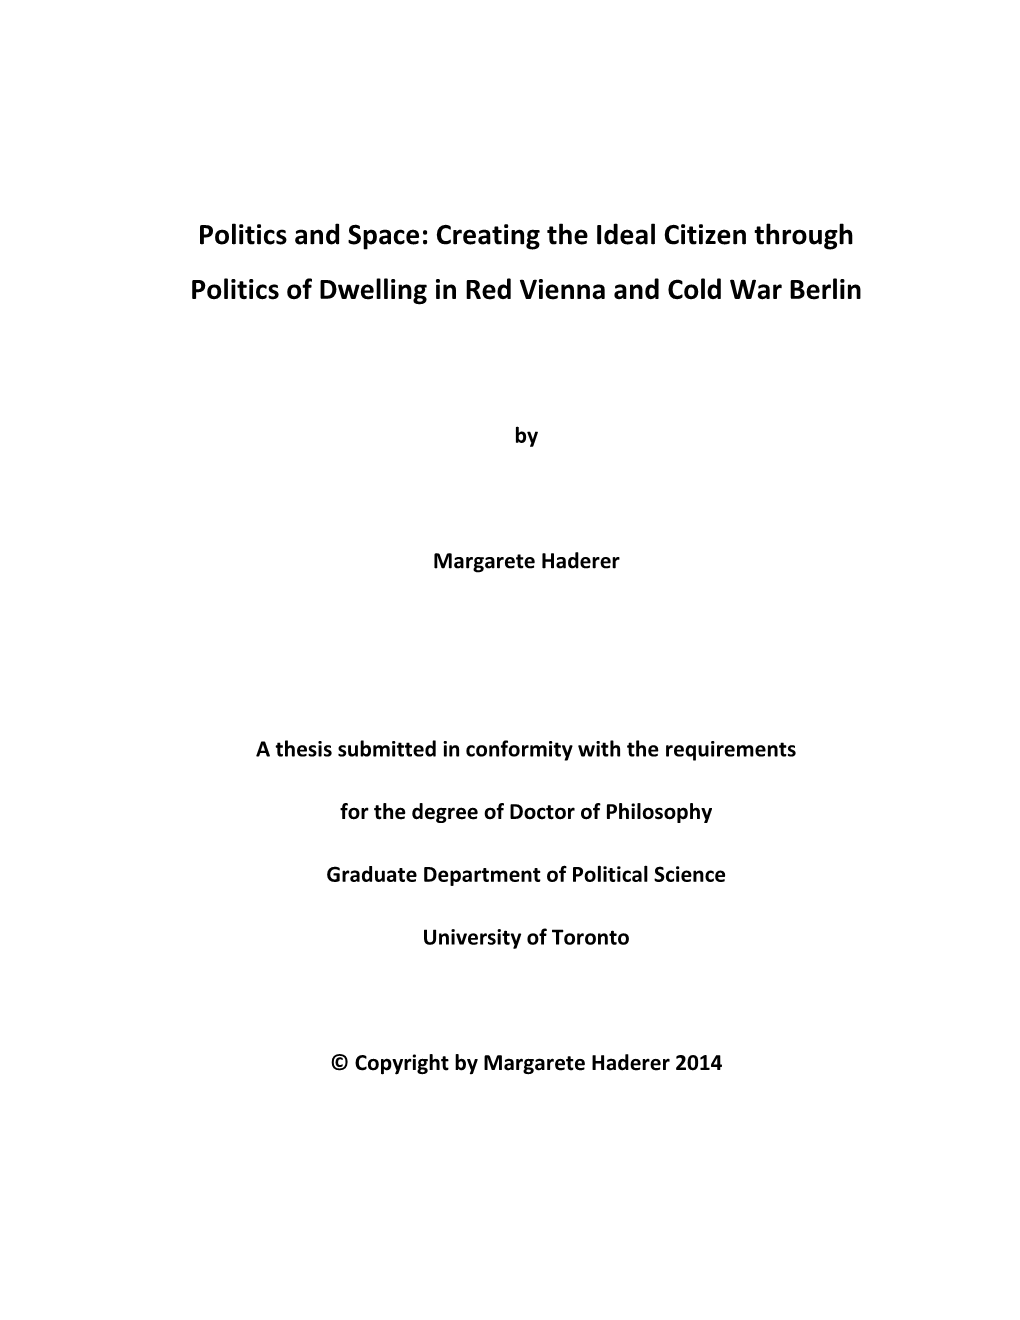 Creating the Ideal Citizen Through Politics of Dwelling in Red Vienna and Cold War Berlin